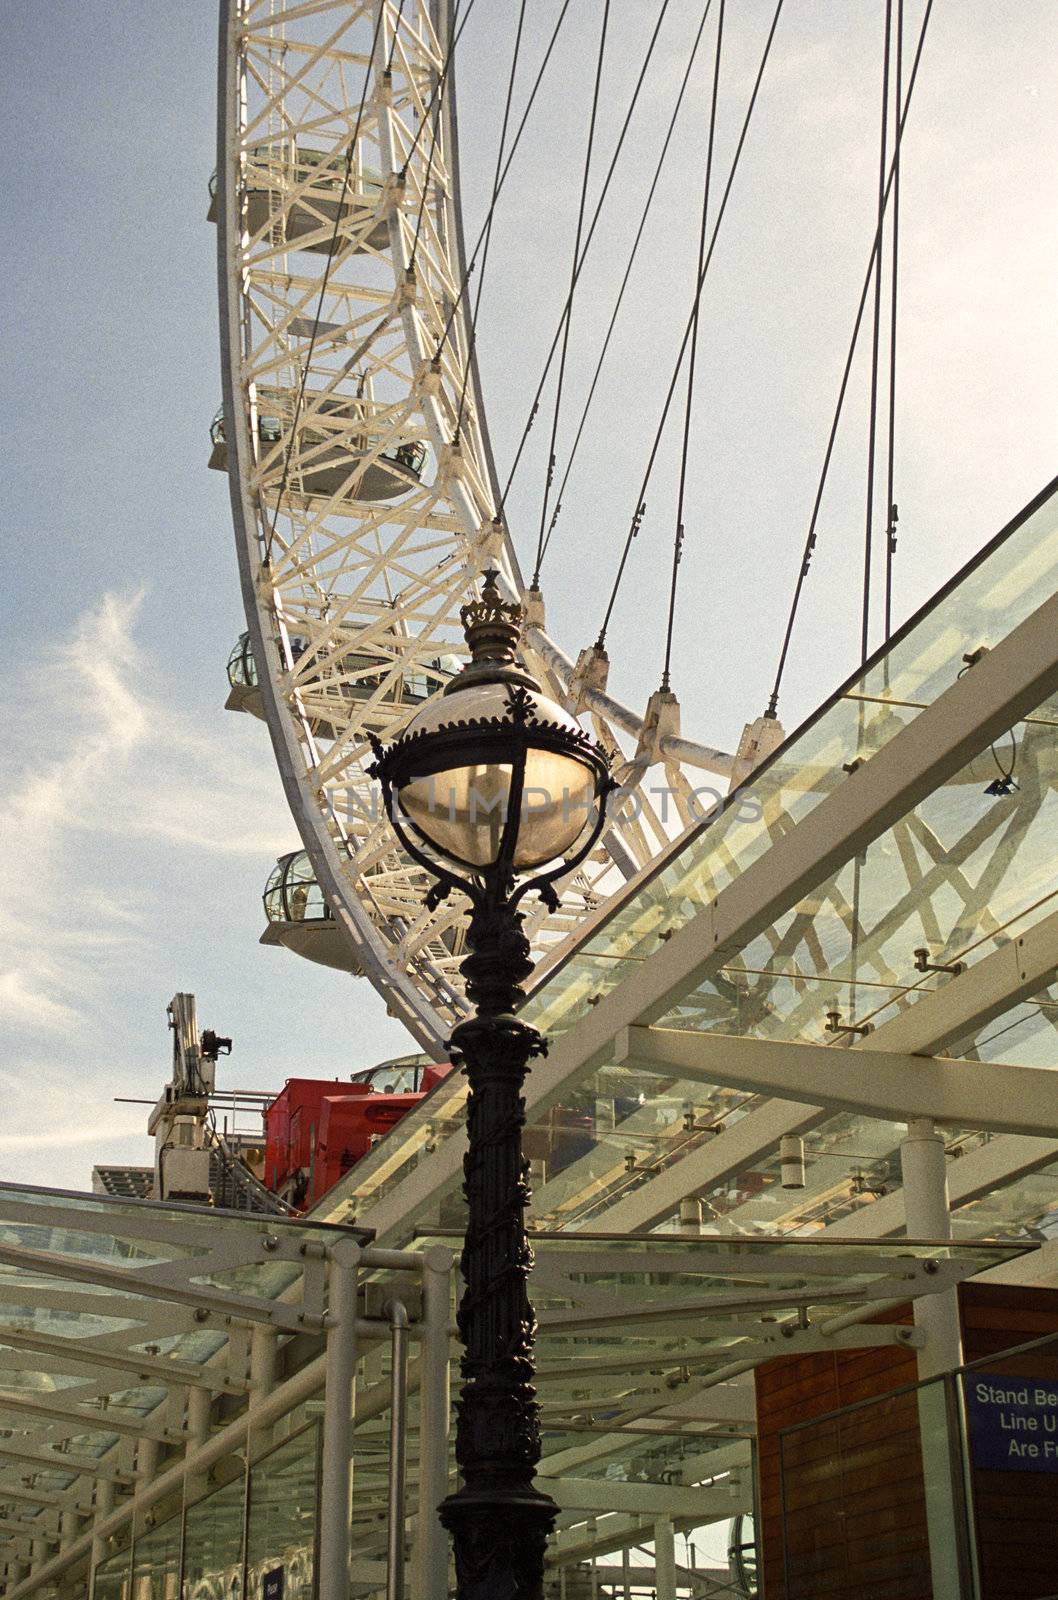 Entrance point for the London Eye